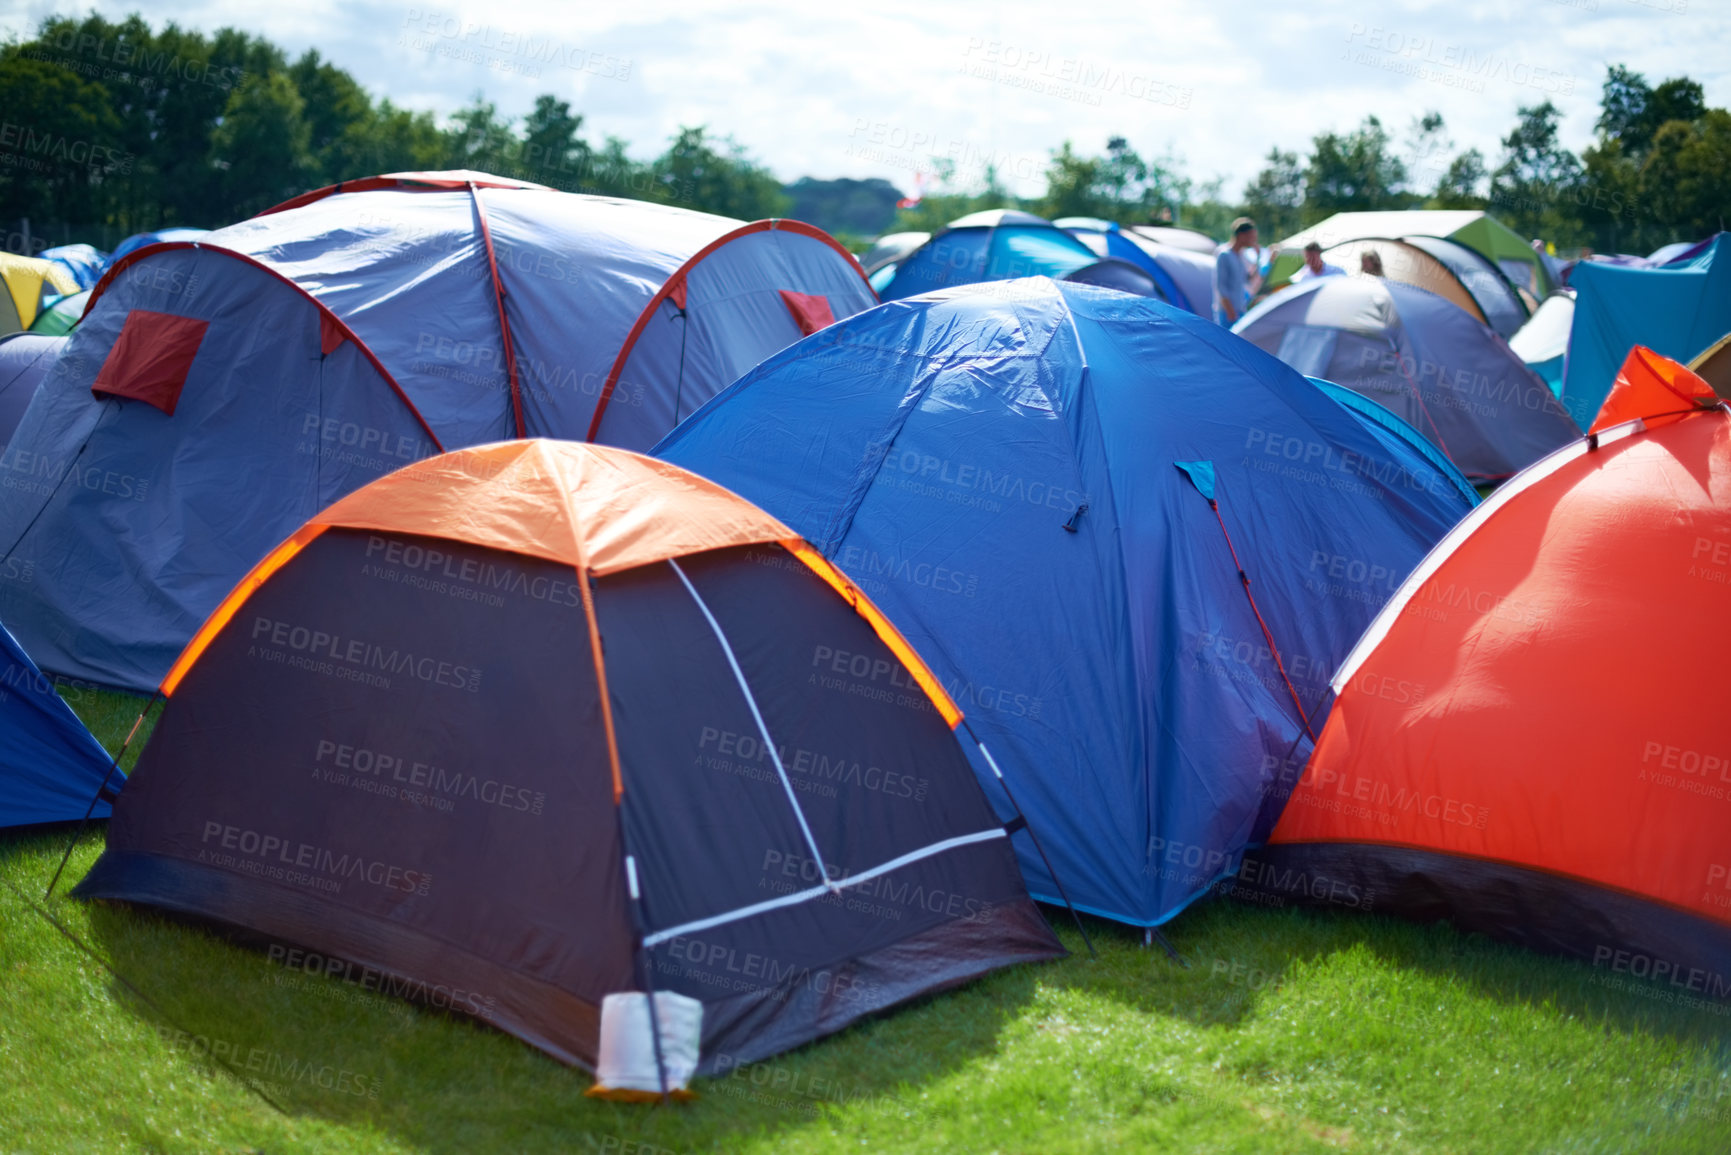 Buy stock photo Group, colourful and camping tents in nature outside of a music festival campsite. Row of canopies placed on ground at musical concert, entertainment event and carnival celebration outdoor on grass